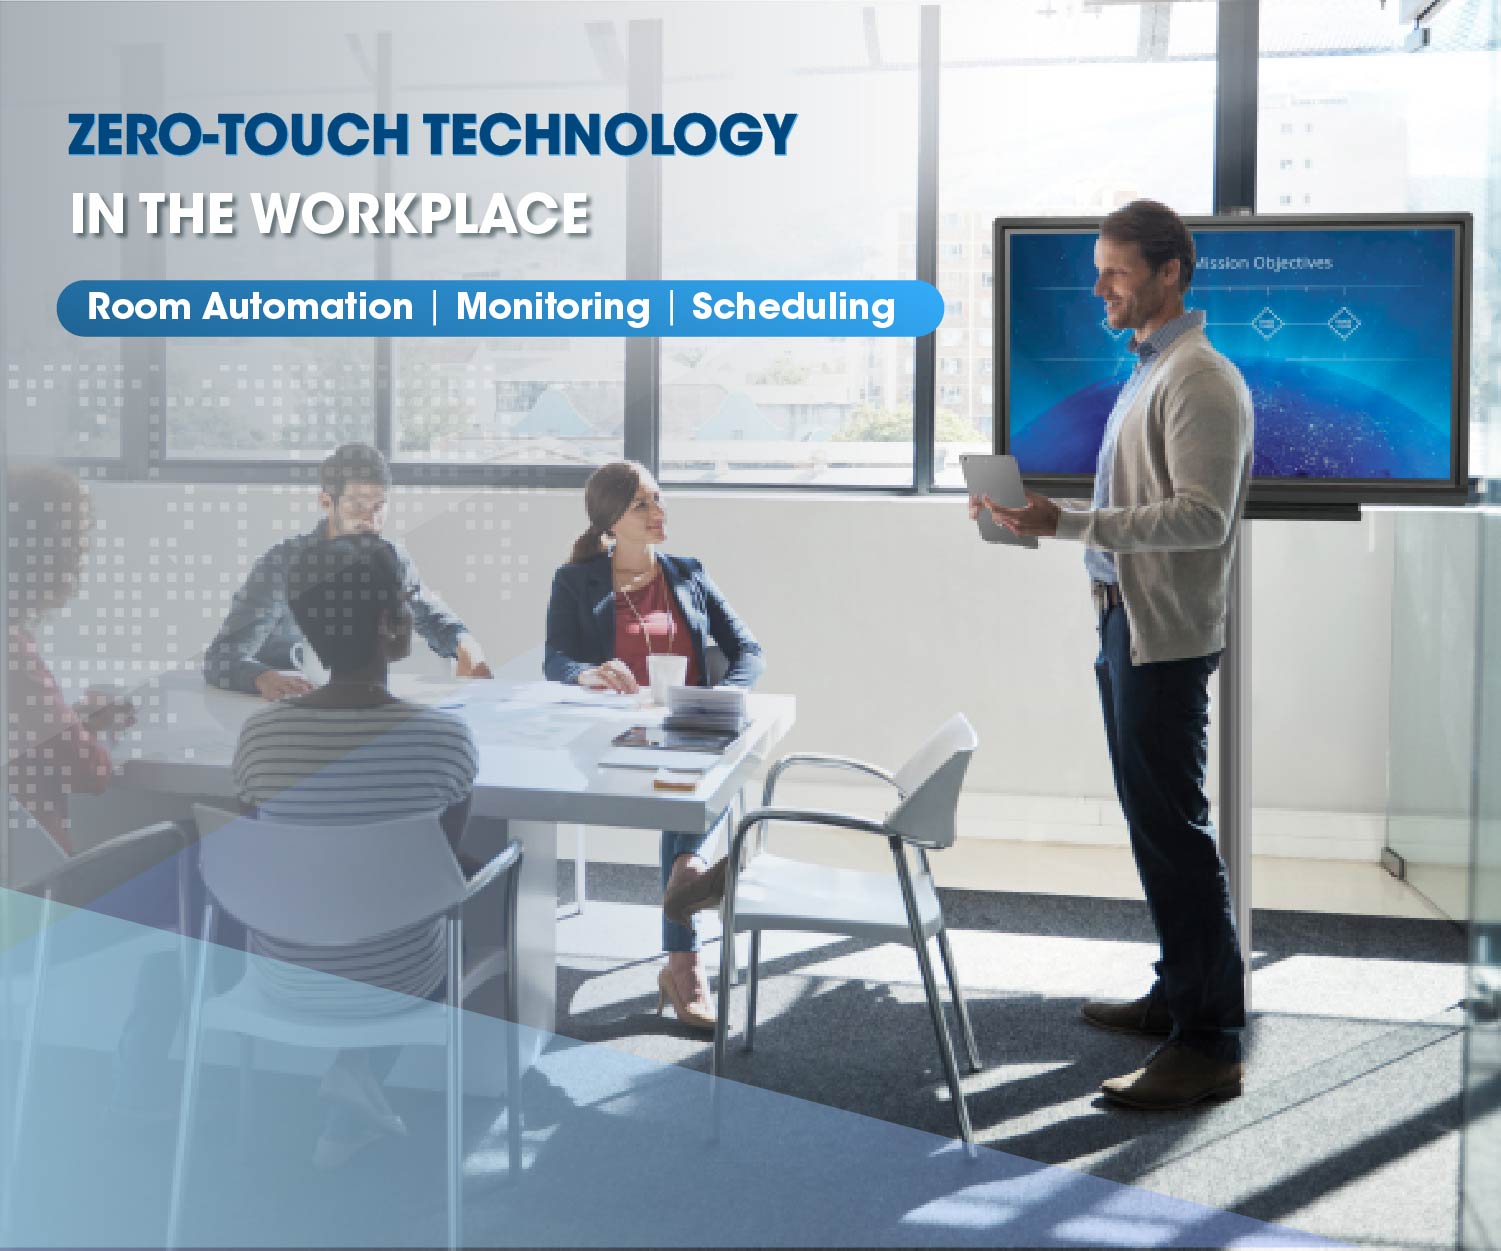 Introducing Zero Touch Technology Into the Workplace